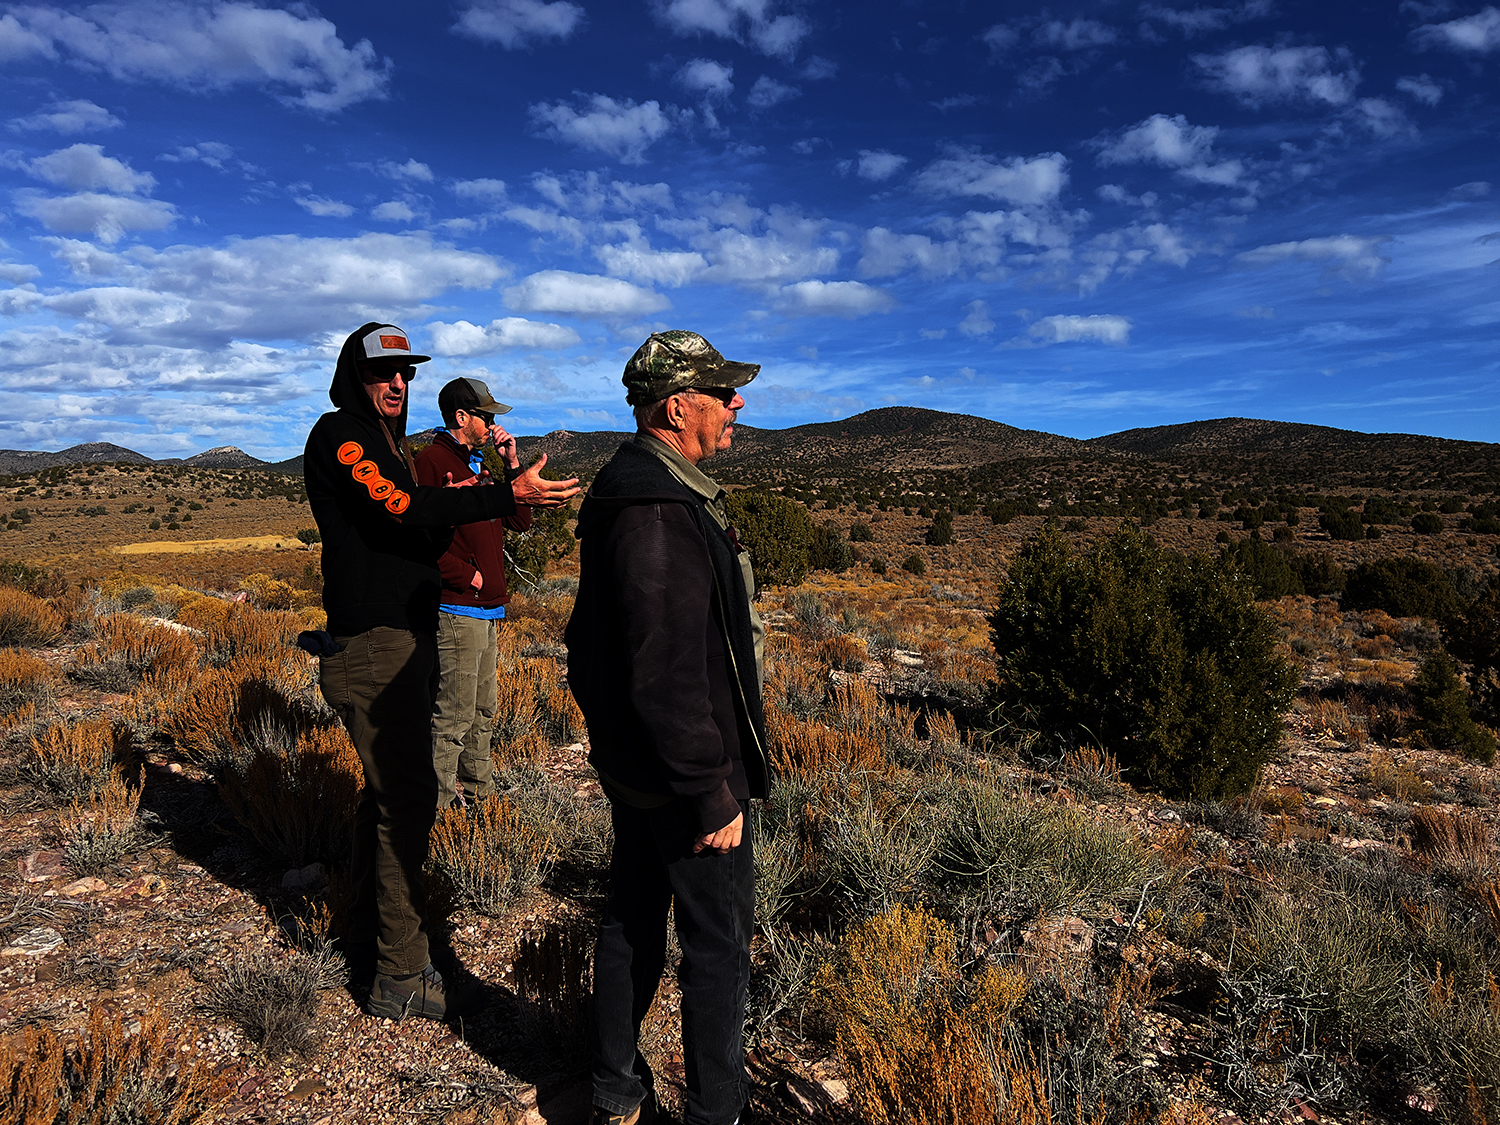 "Three men looking over a desert landscape - man in the middle talking with his hands."